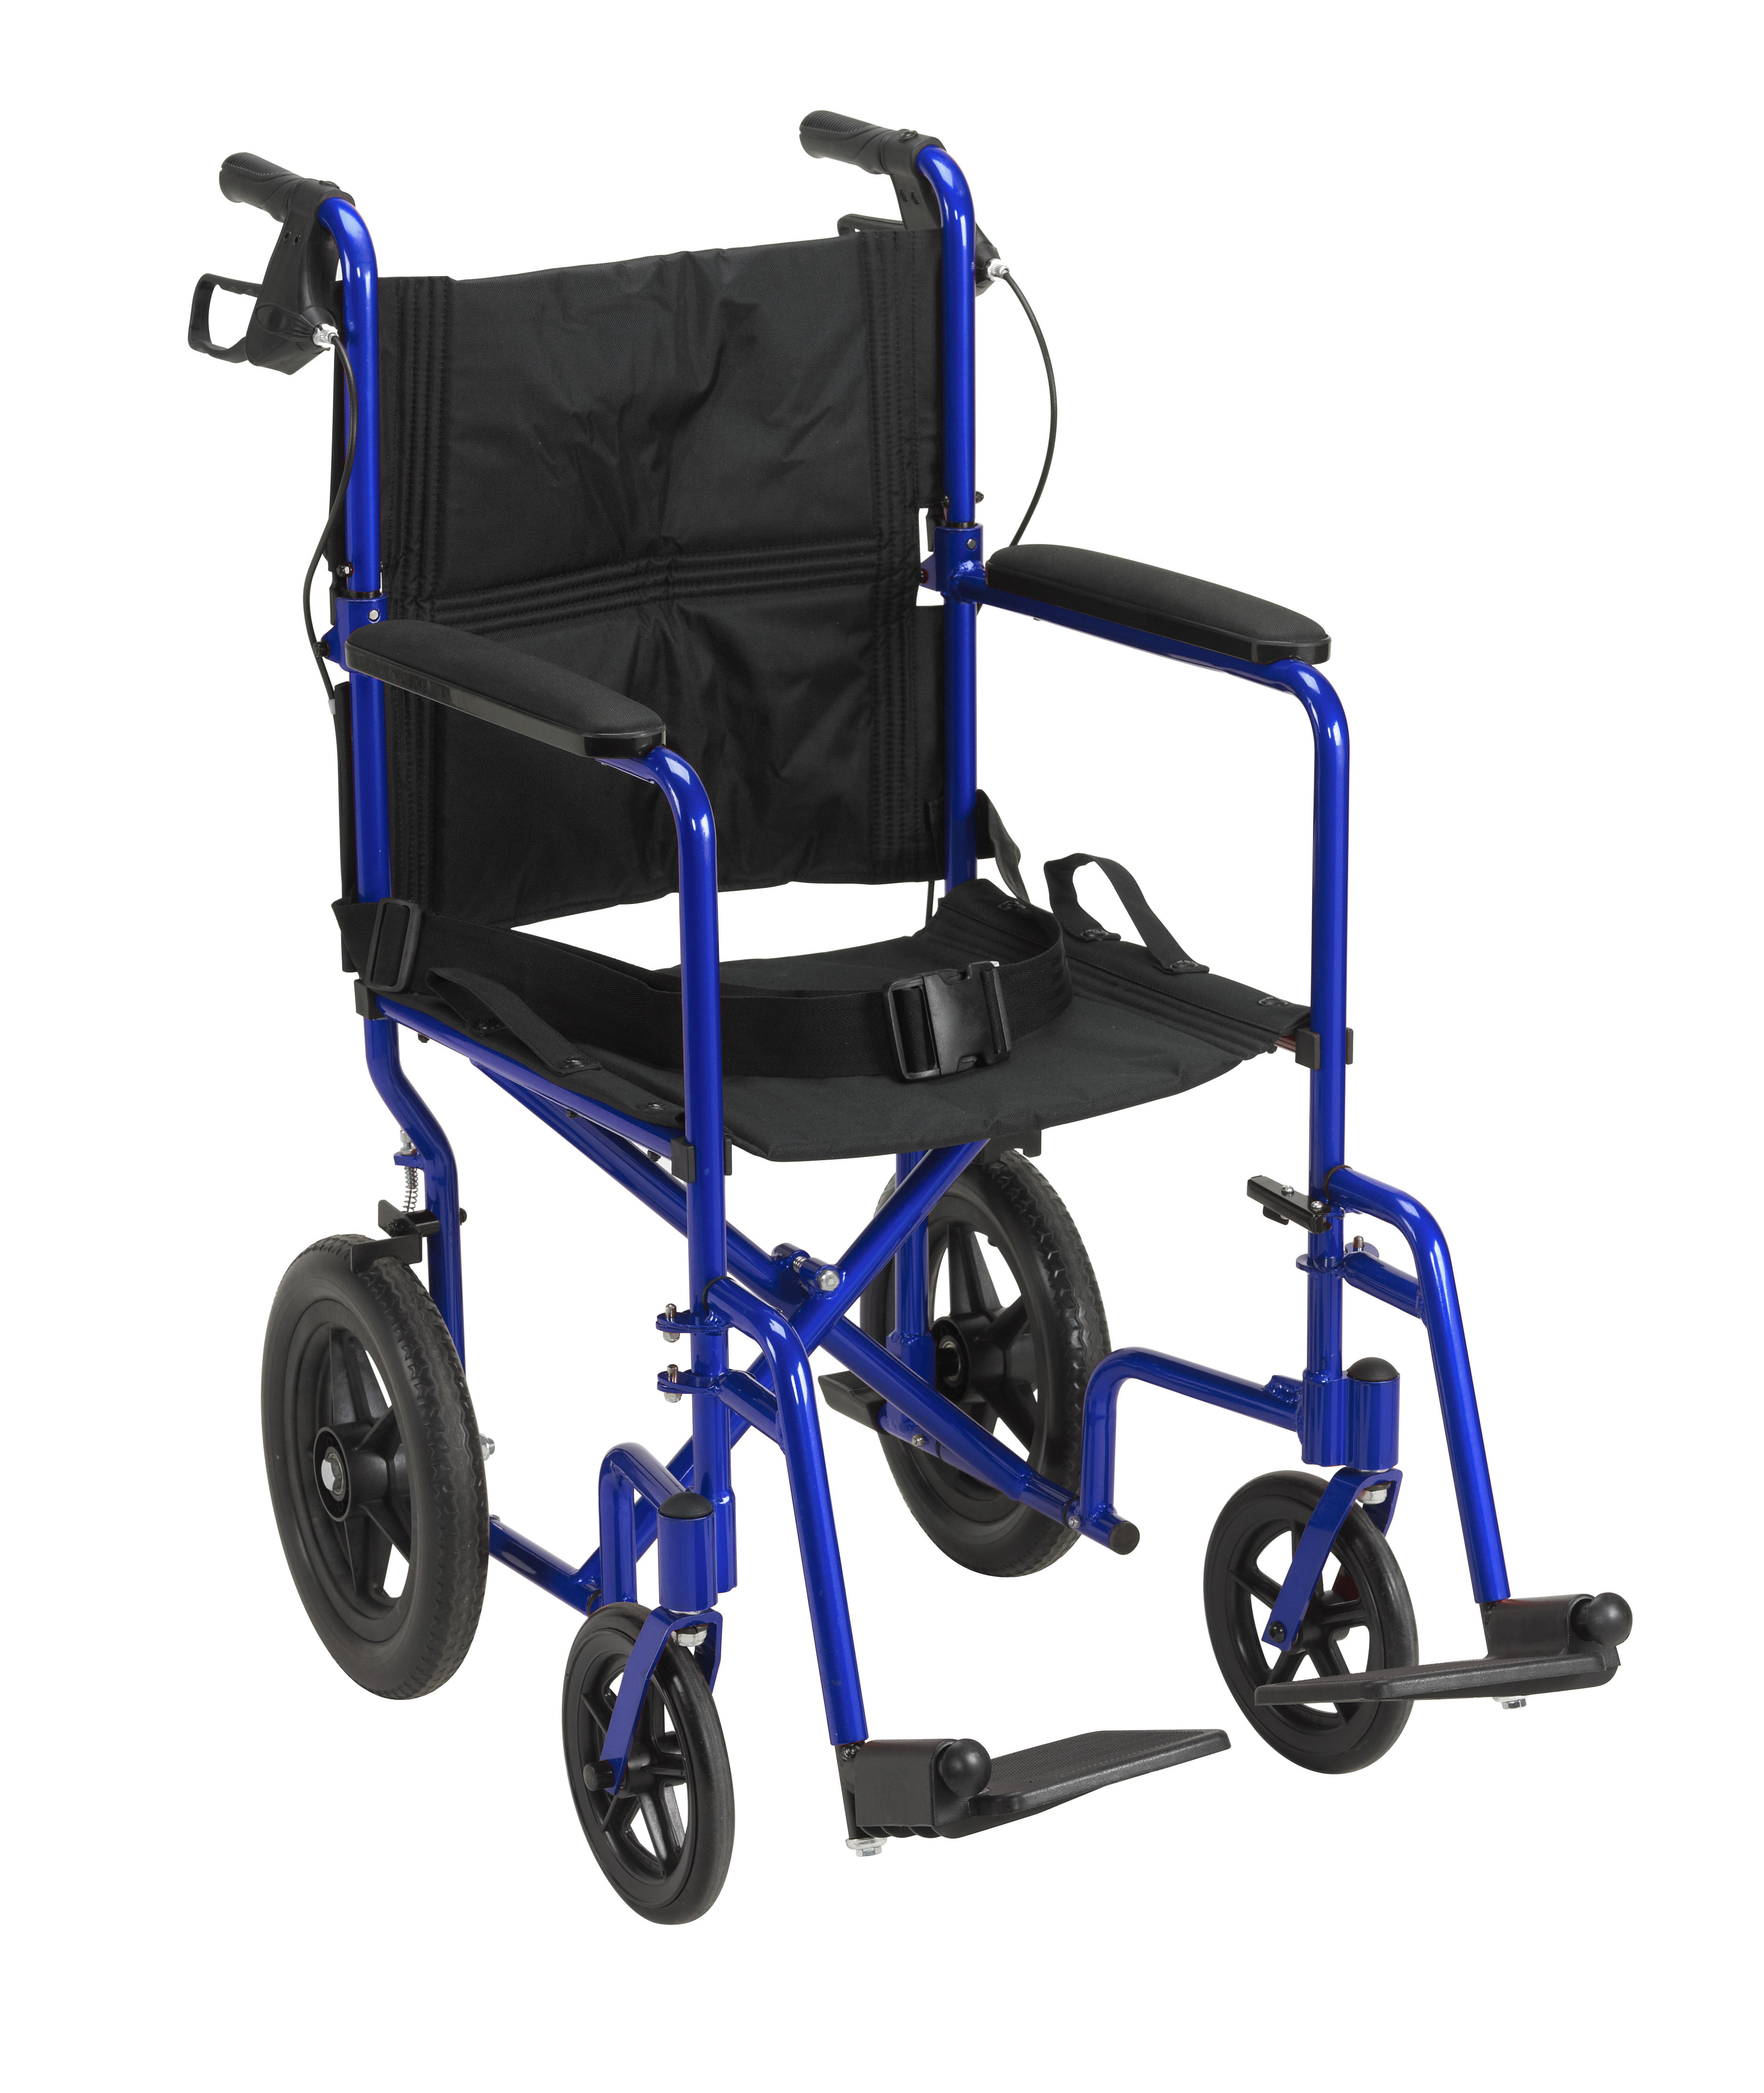 Drive Medical Lightweight Expedition Transport Wheelchair with Hand Brakes, Blue, 19" Seat - image 1 of 6